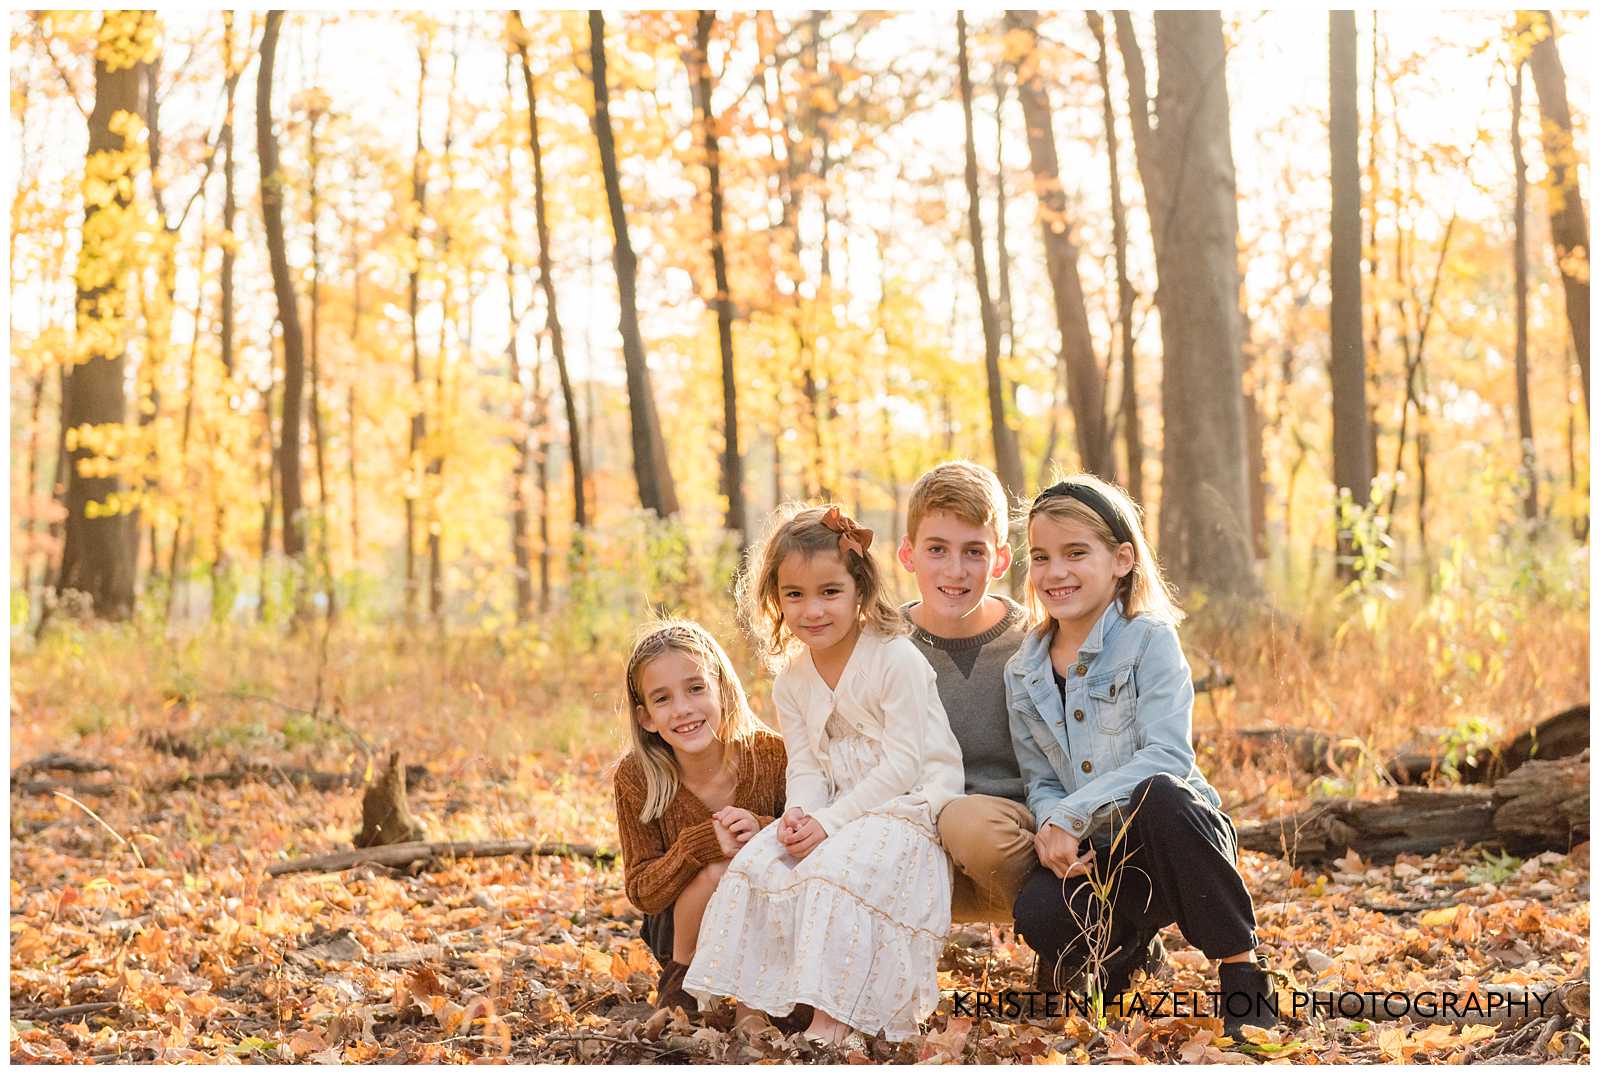 Four young brothers and sisters in the fall woods